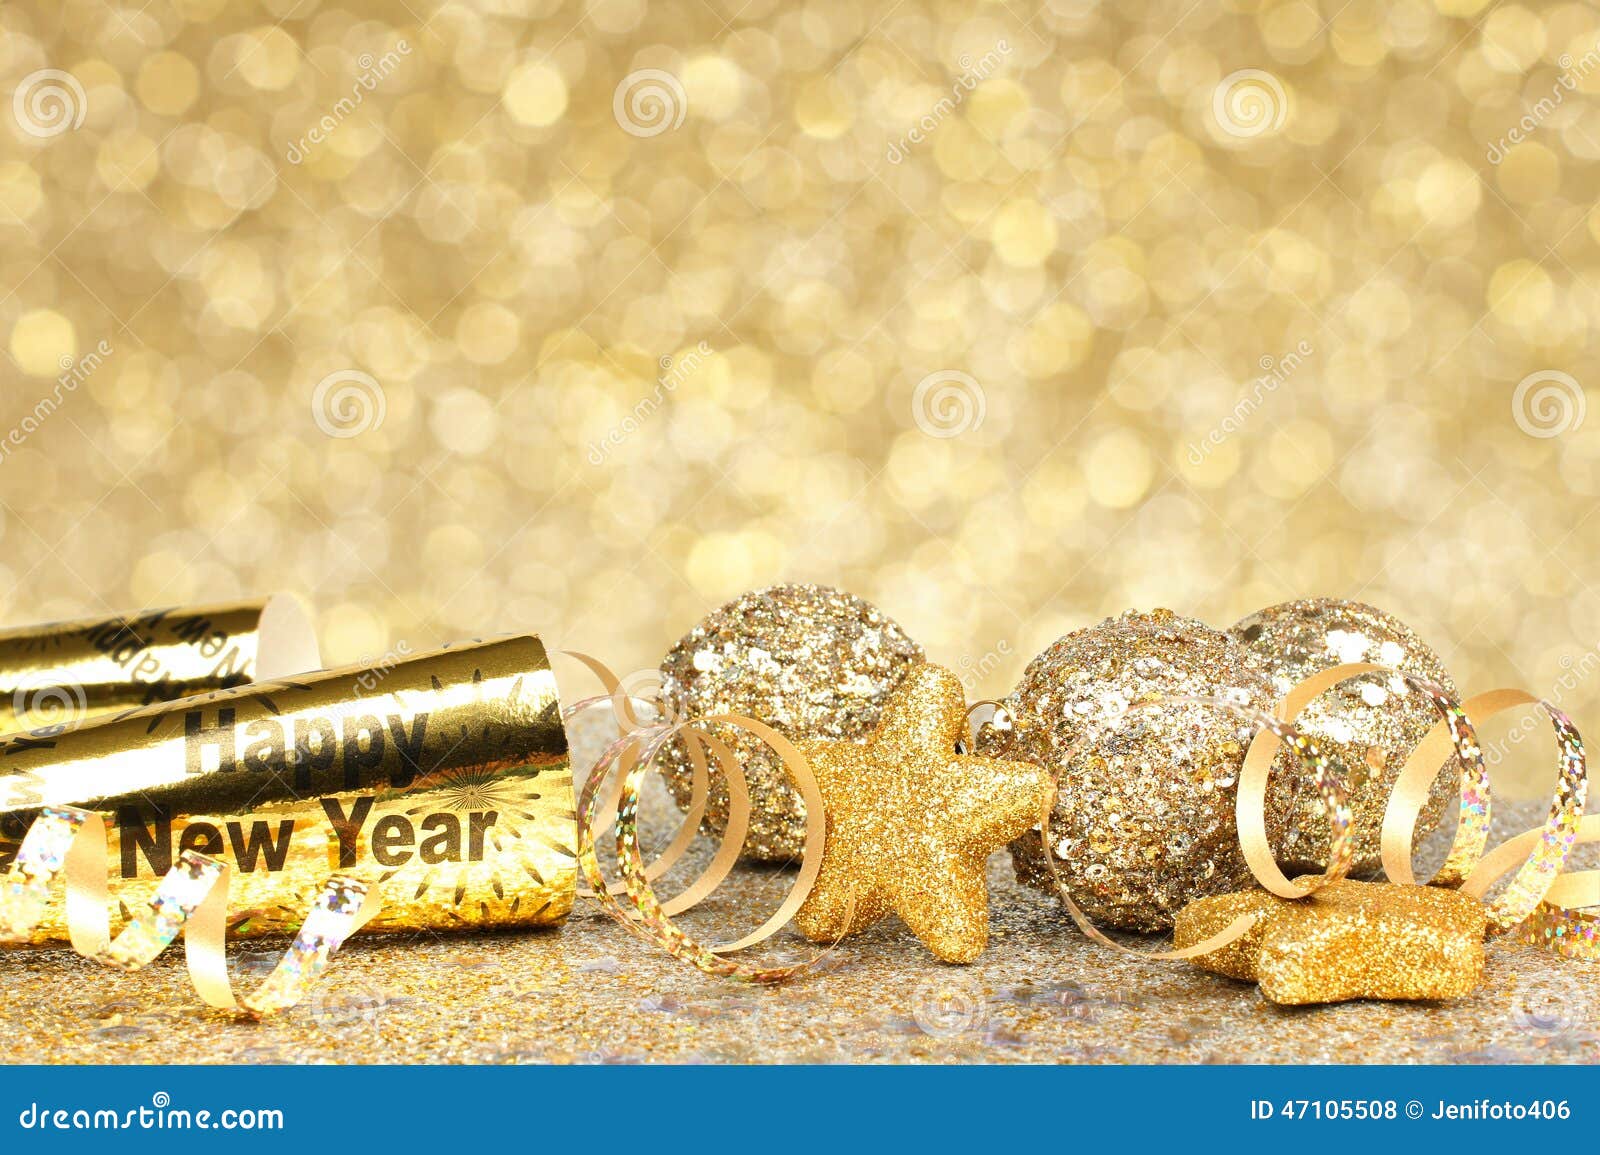 new years eve golden party background